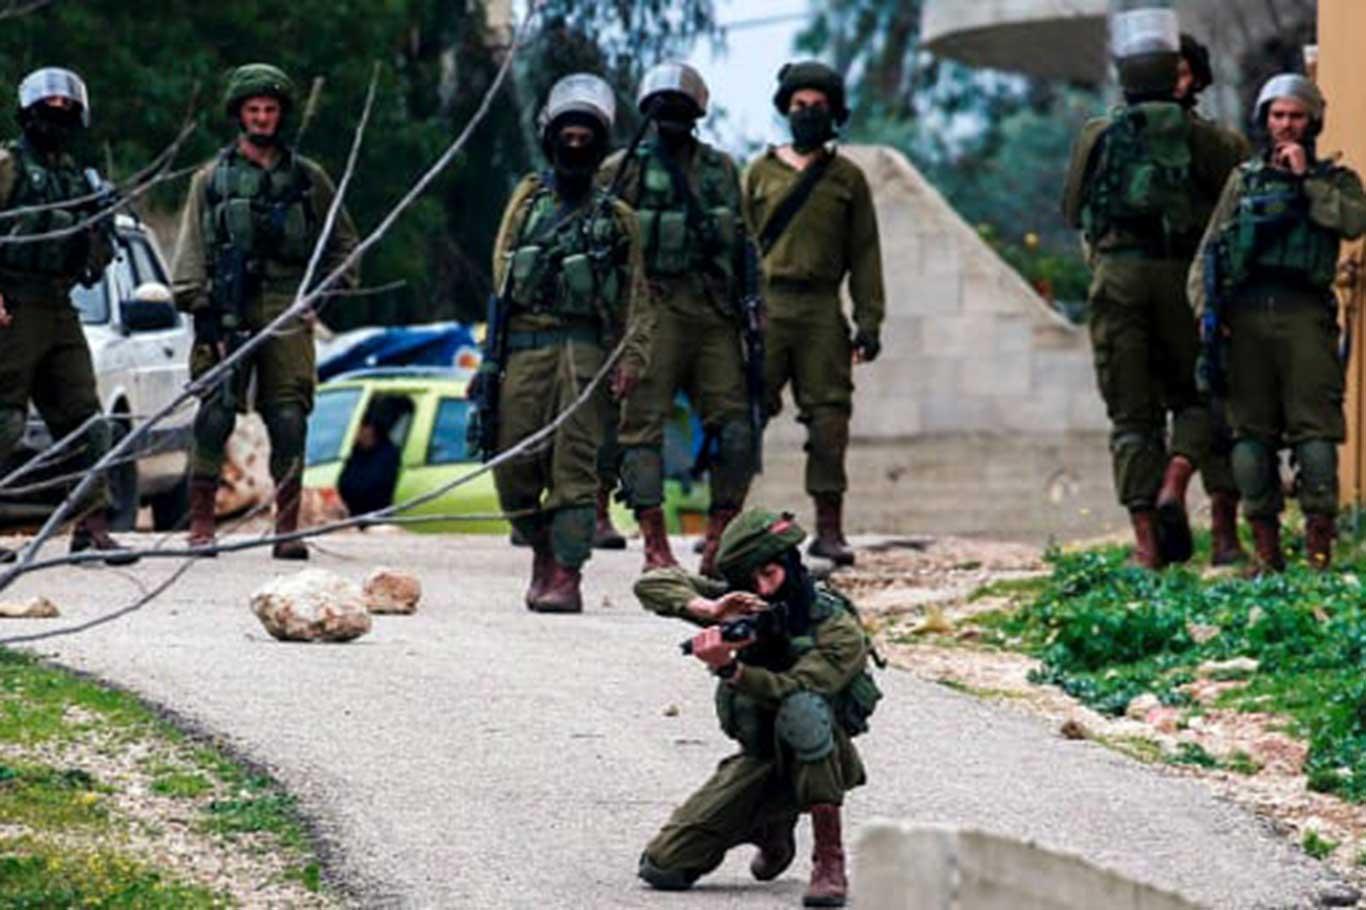 Palestinian kid injured in clashes with zionist gangs in Nablus